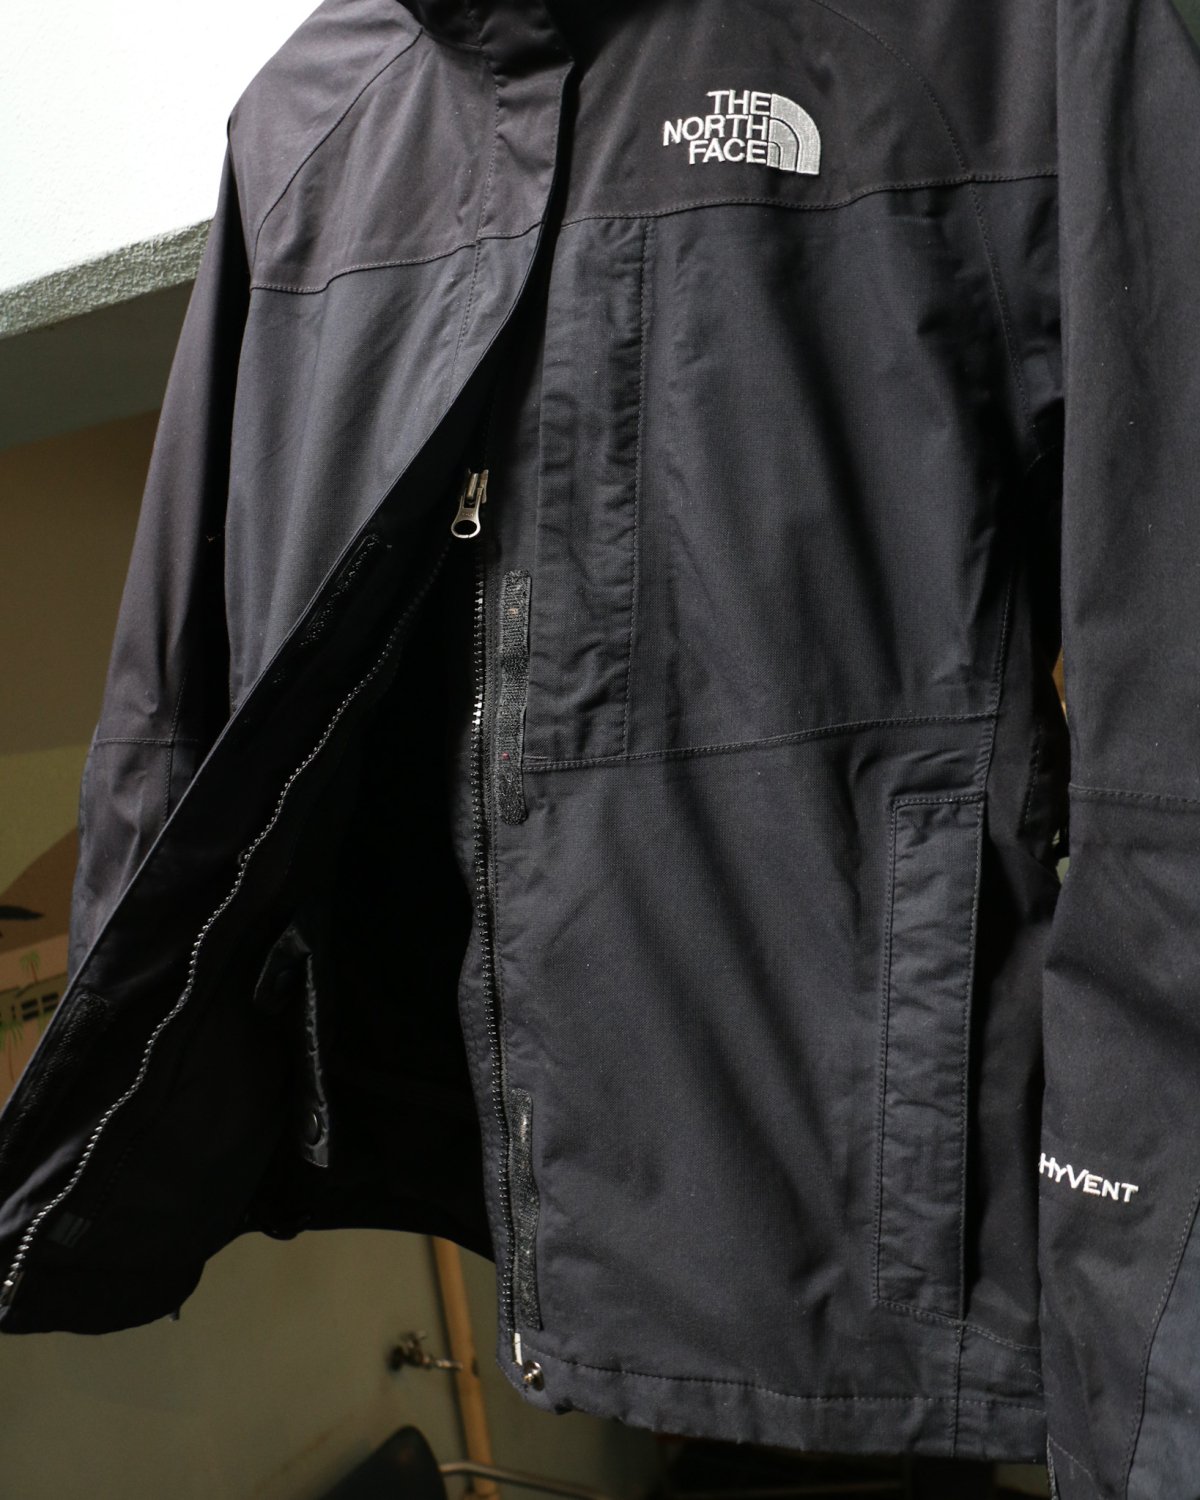 “THE NORTH FACE” Hyvent Jacket